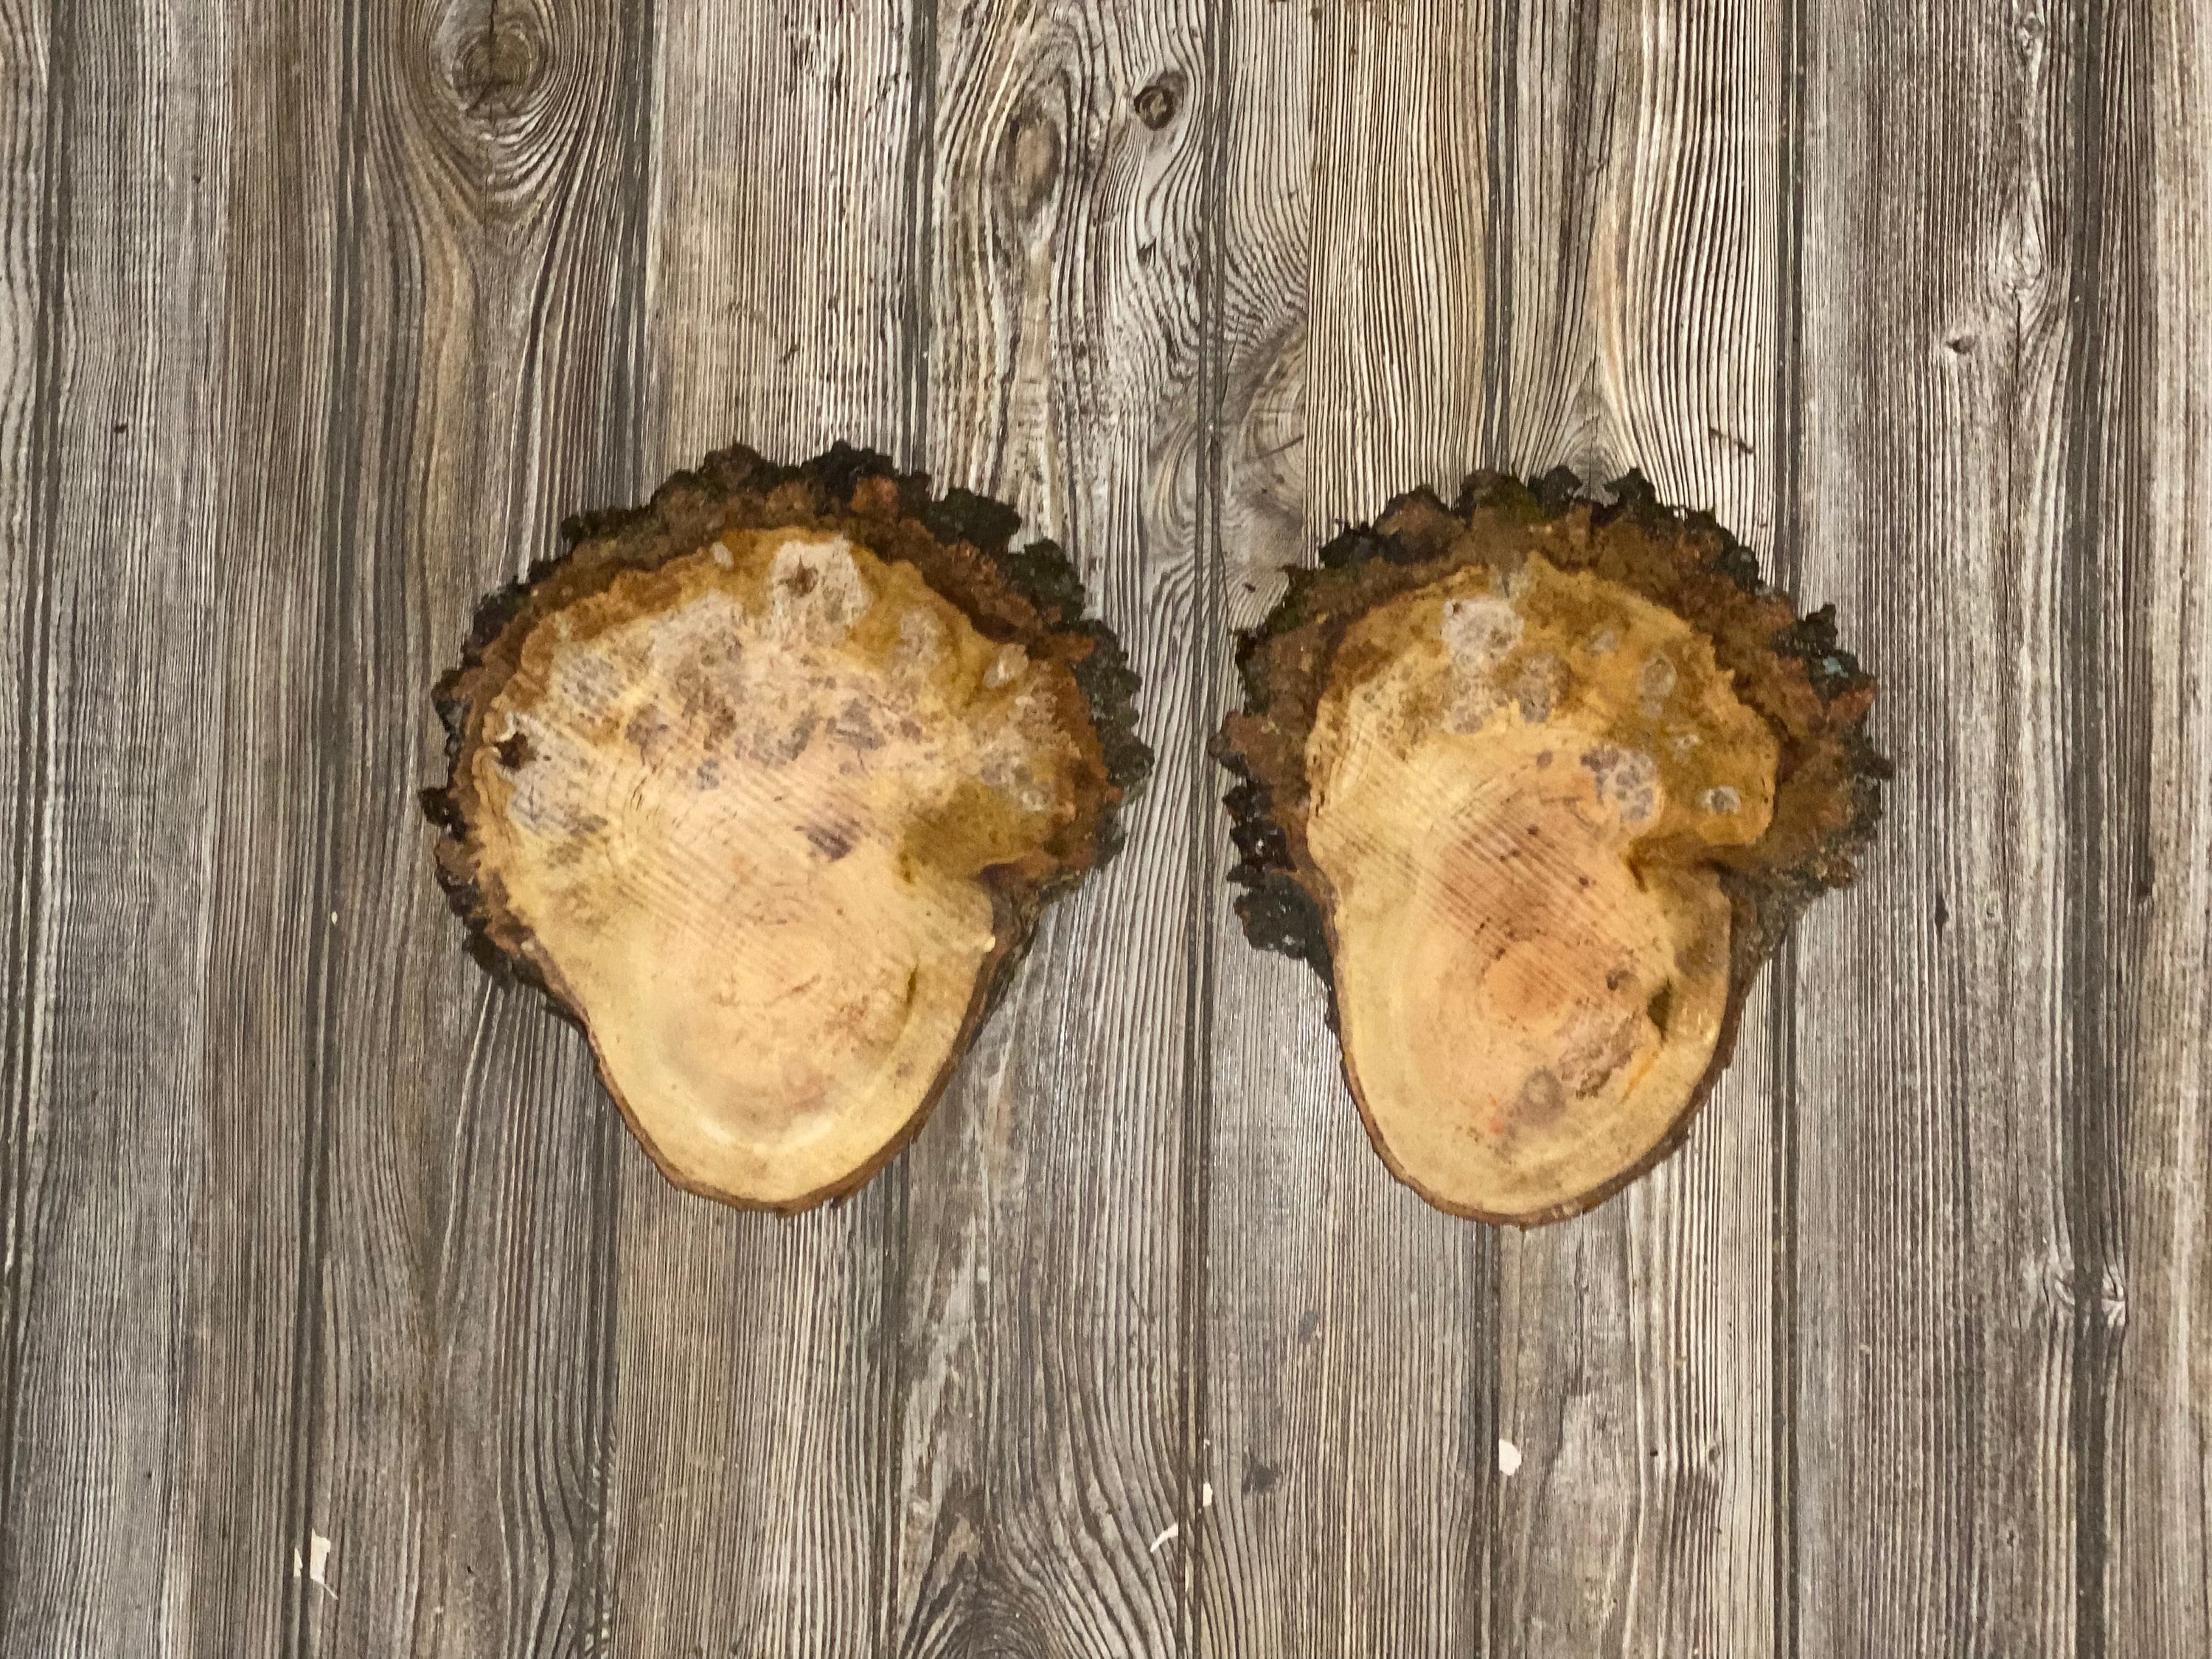 Two "Curly Head" Cherry Burl Slices, Approximately 10 Inches Long by 9 Inches Wide and 3/4 Inch Thick